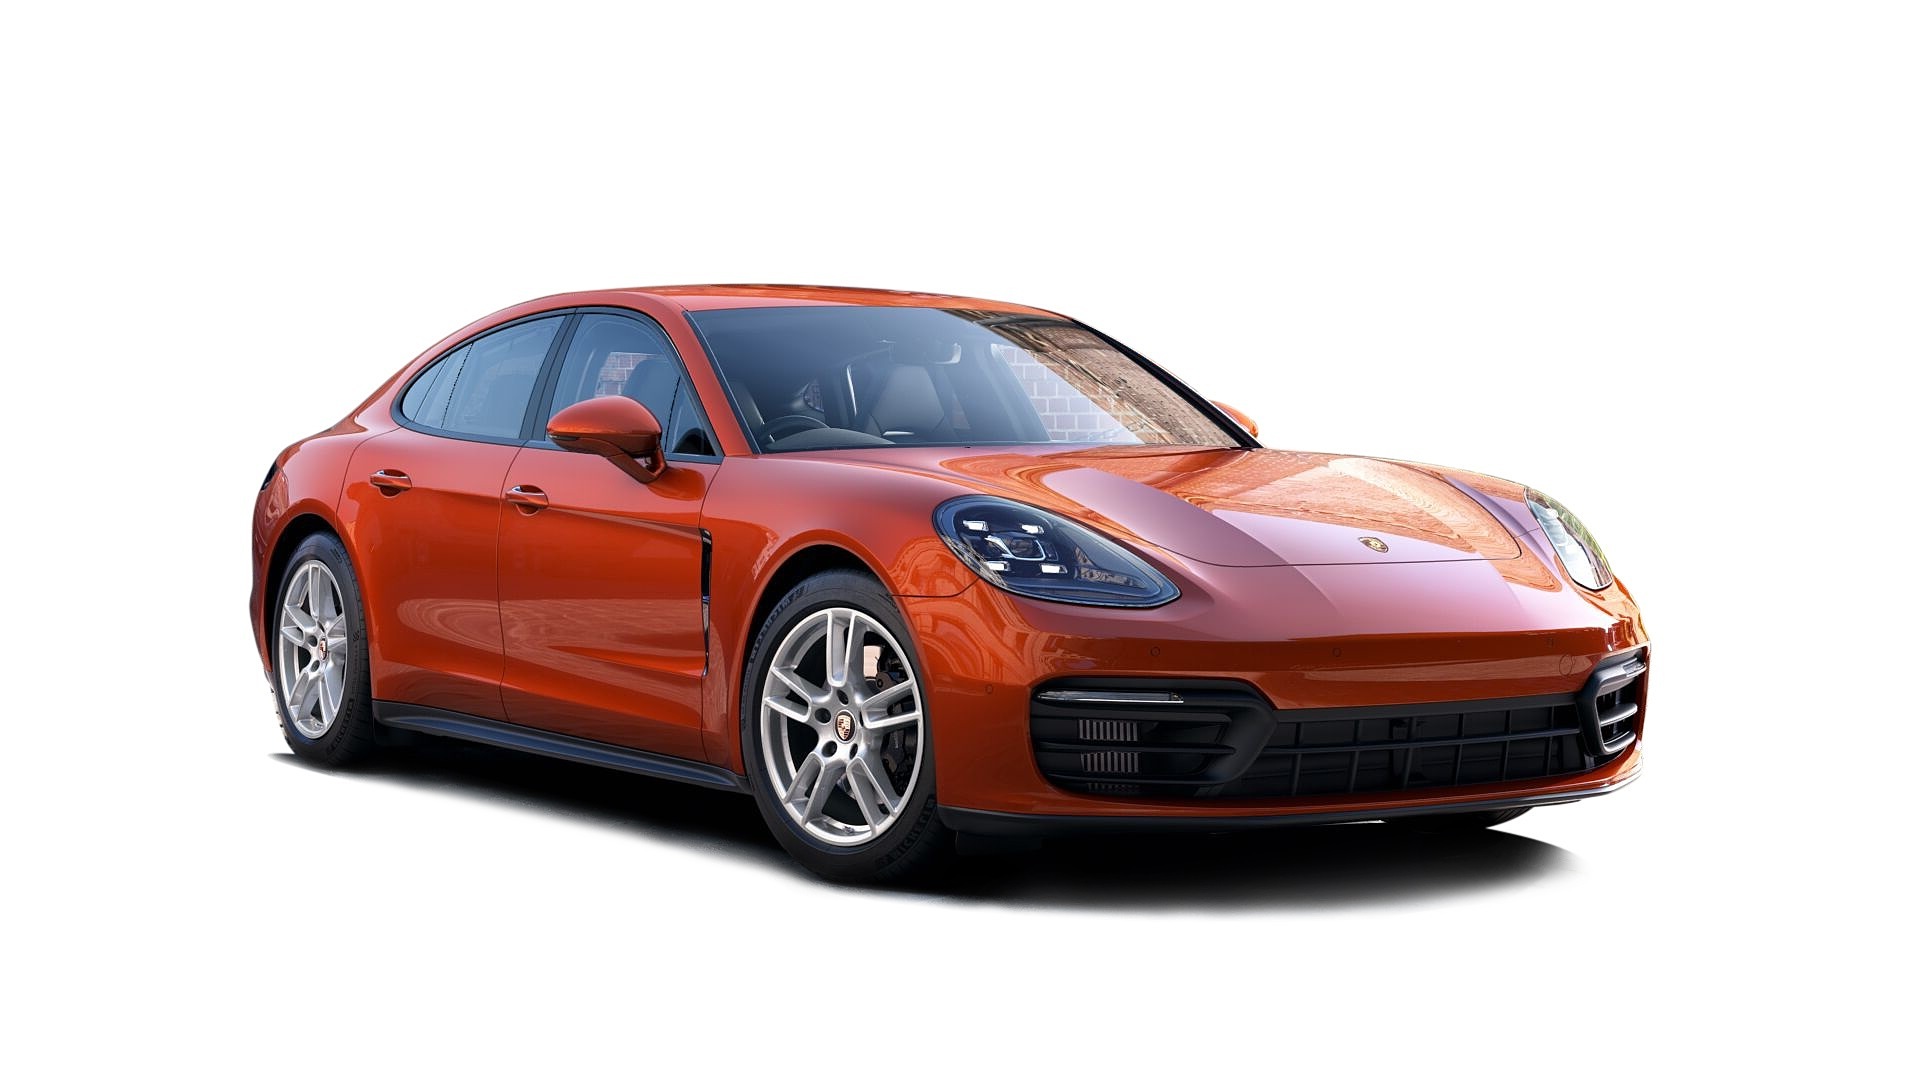 Porsche Panamera Car Mileage, Engine, Price, Safety and Features, Space